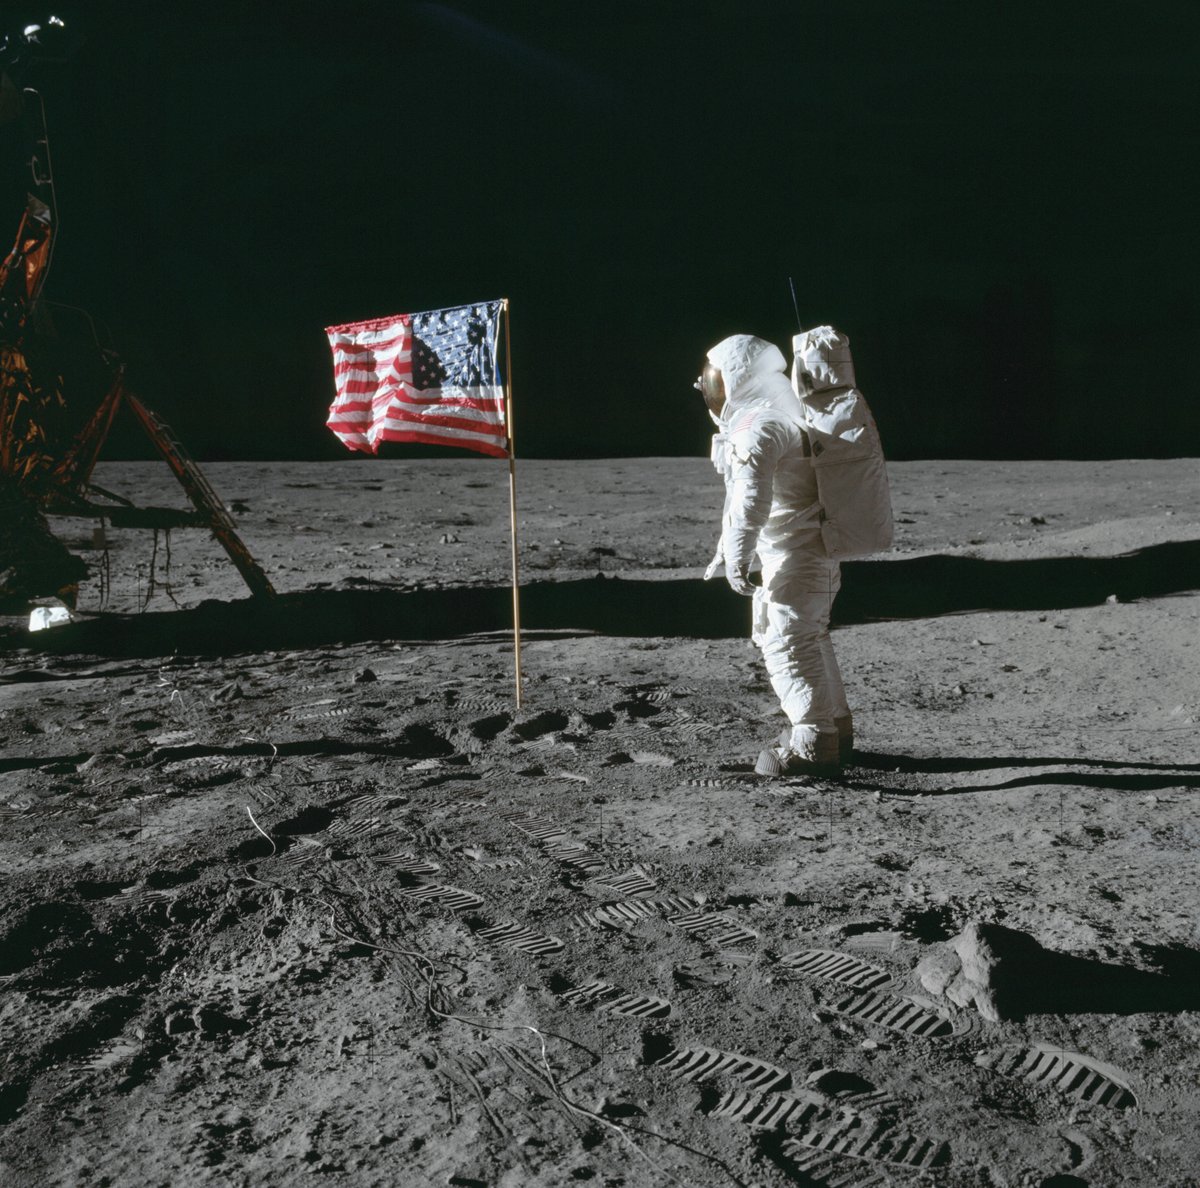 It's been nearly 47 years since Americans last walked on the Moon. The Trump Administration wants to change that, giving NASA orders to return to the Moon within the next 5 years.  Image: NASA